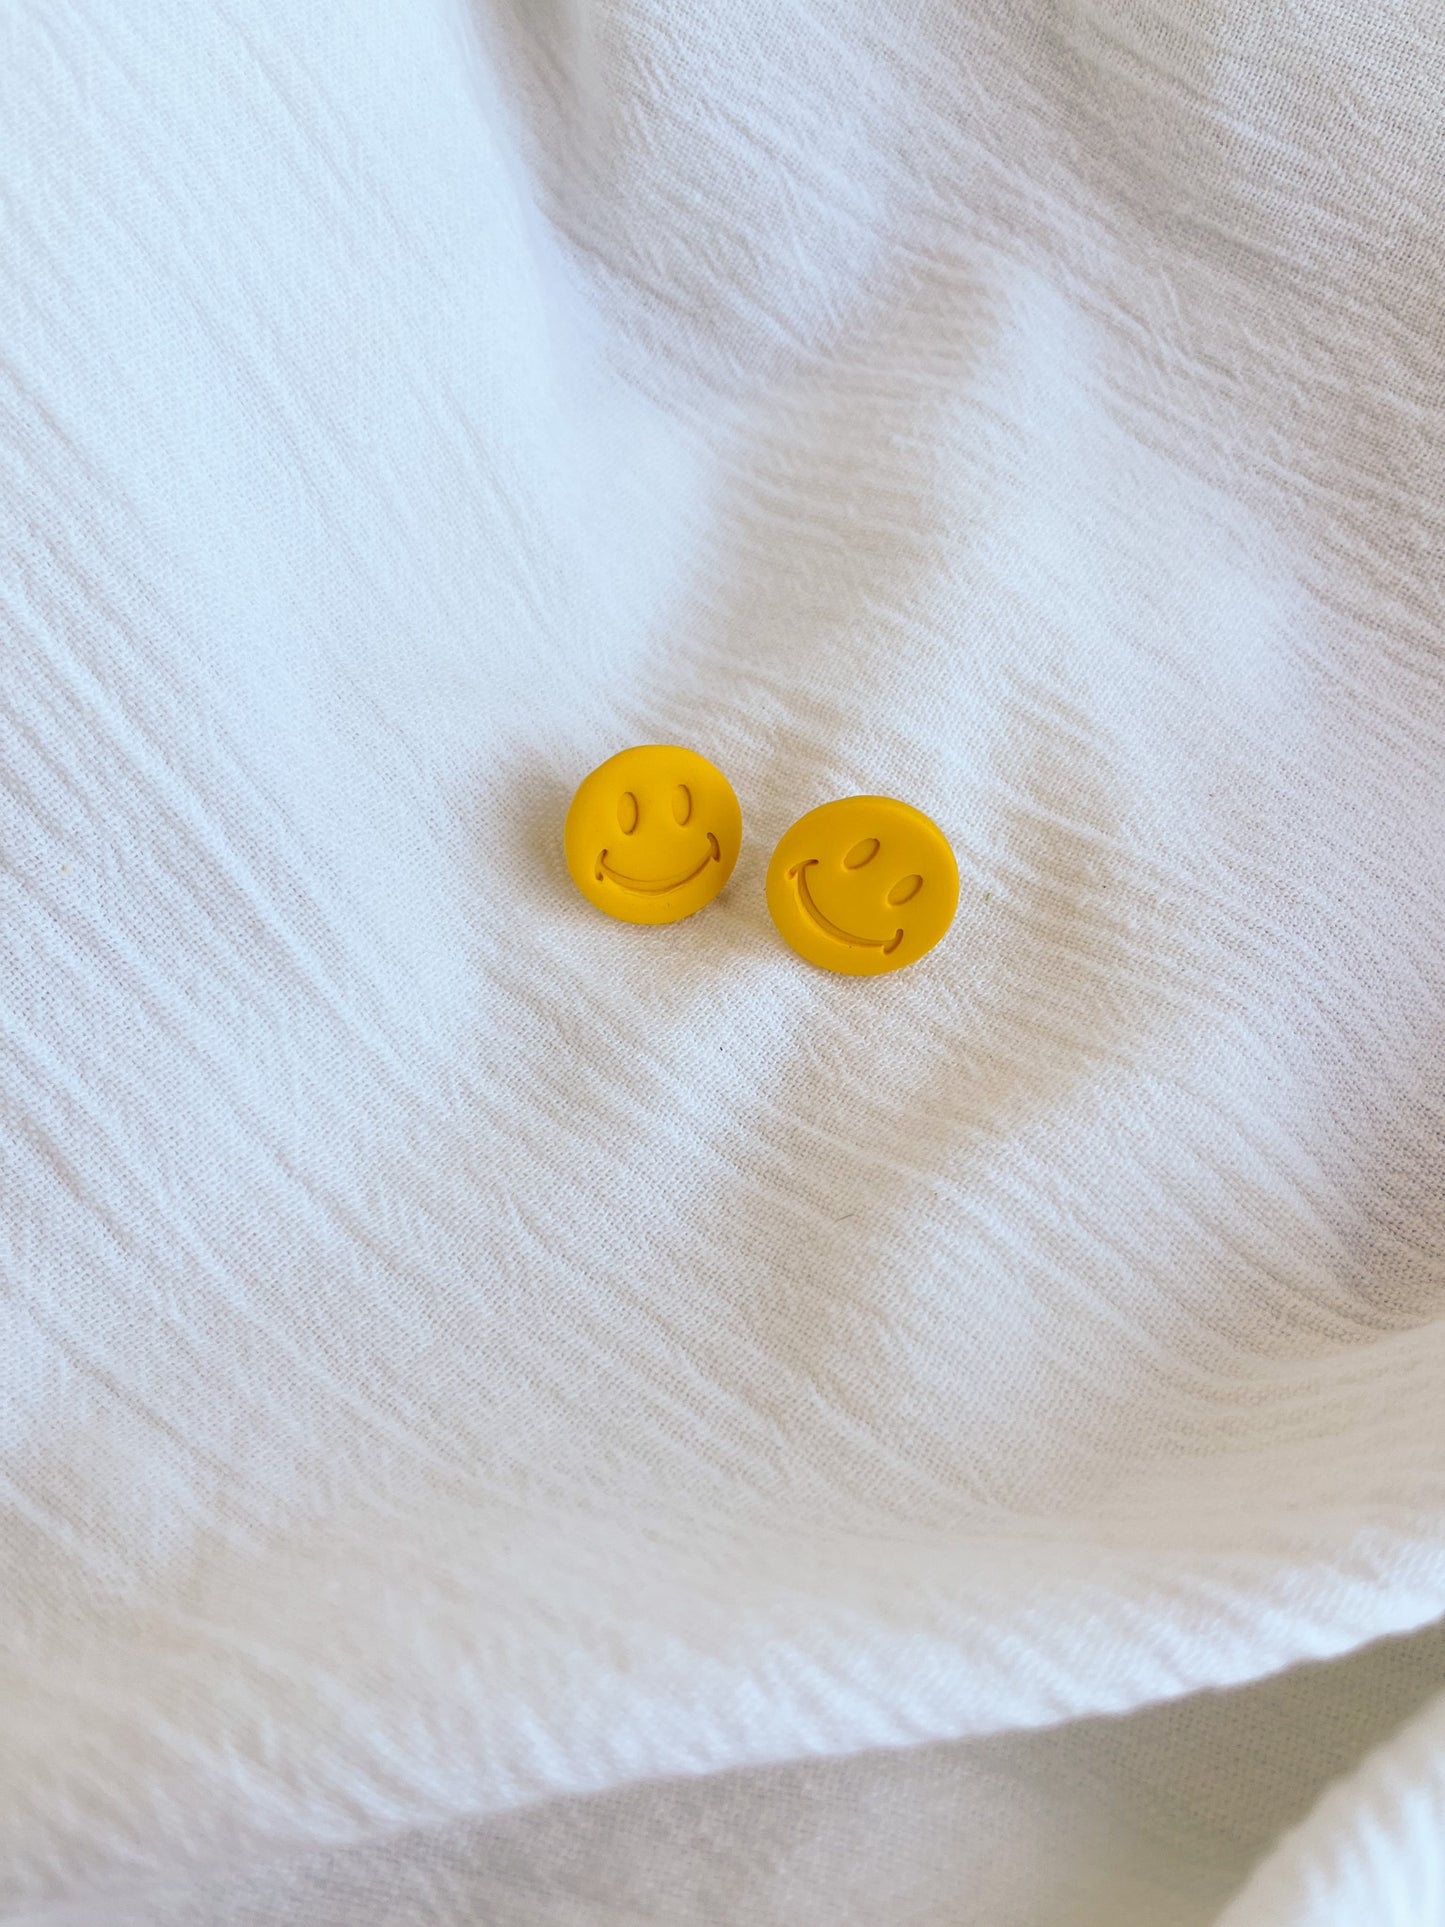 Smiley Face Studs - 3 Sizes